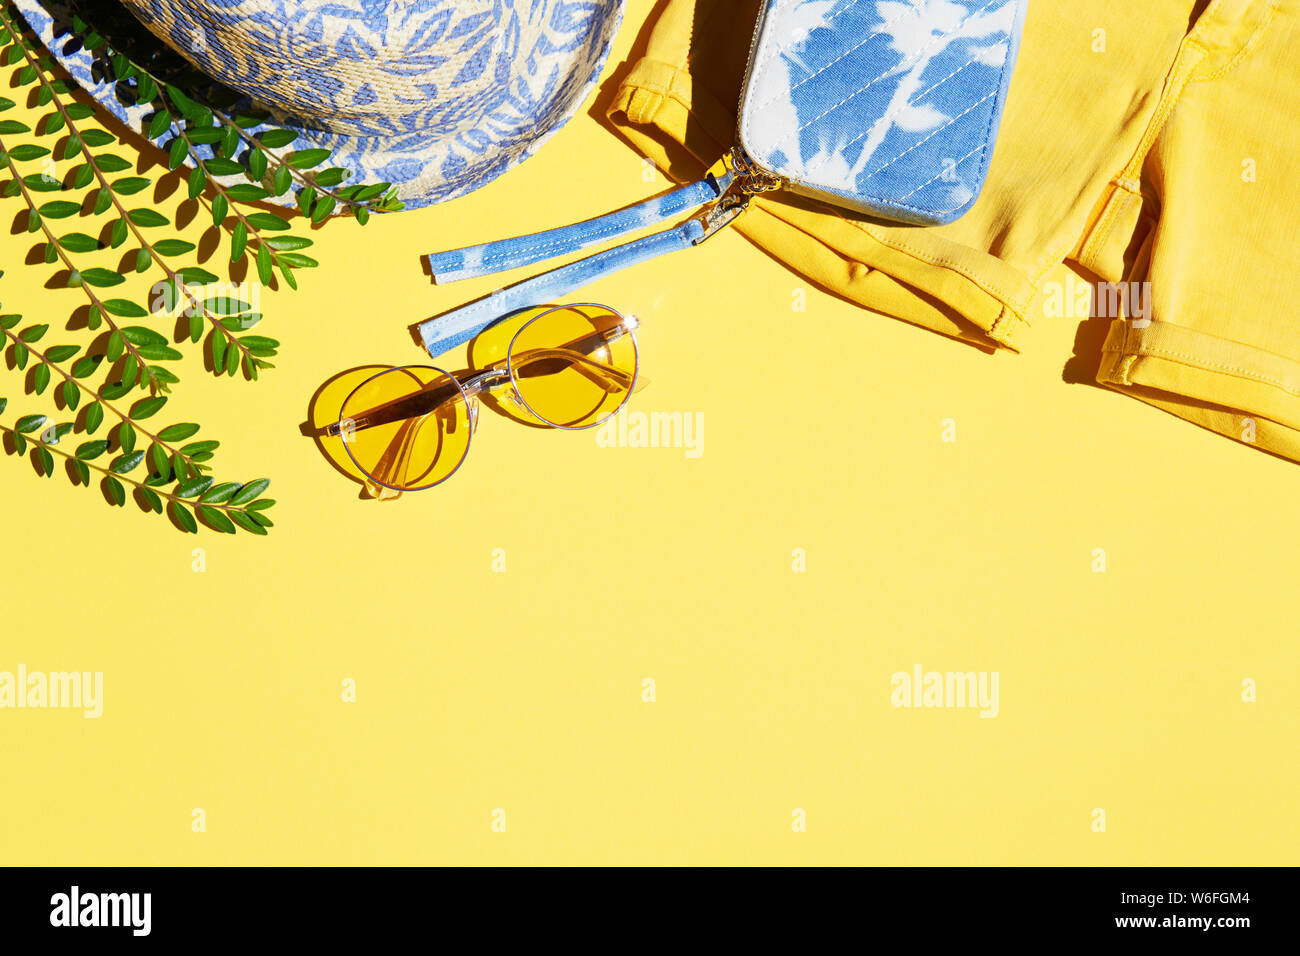 Woman summer beach fashion accessories and clothing items on yellow background Stock Photo